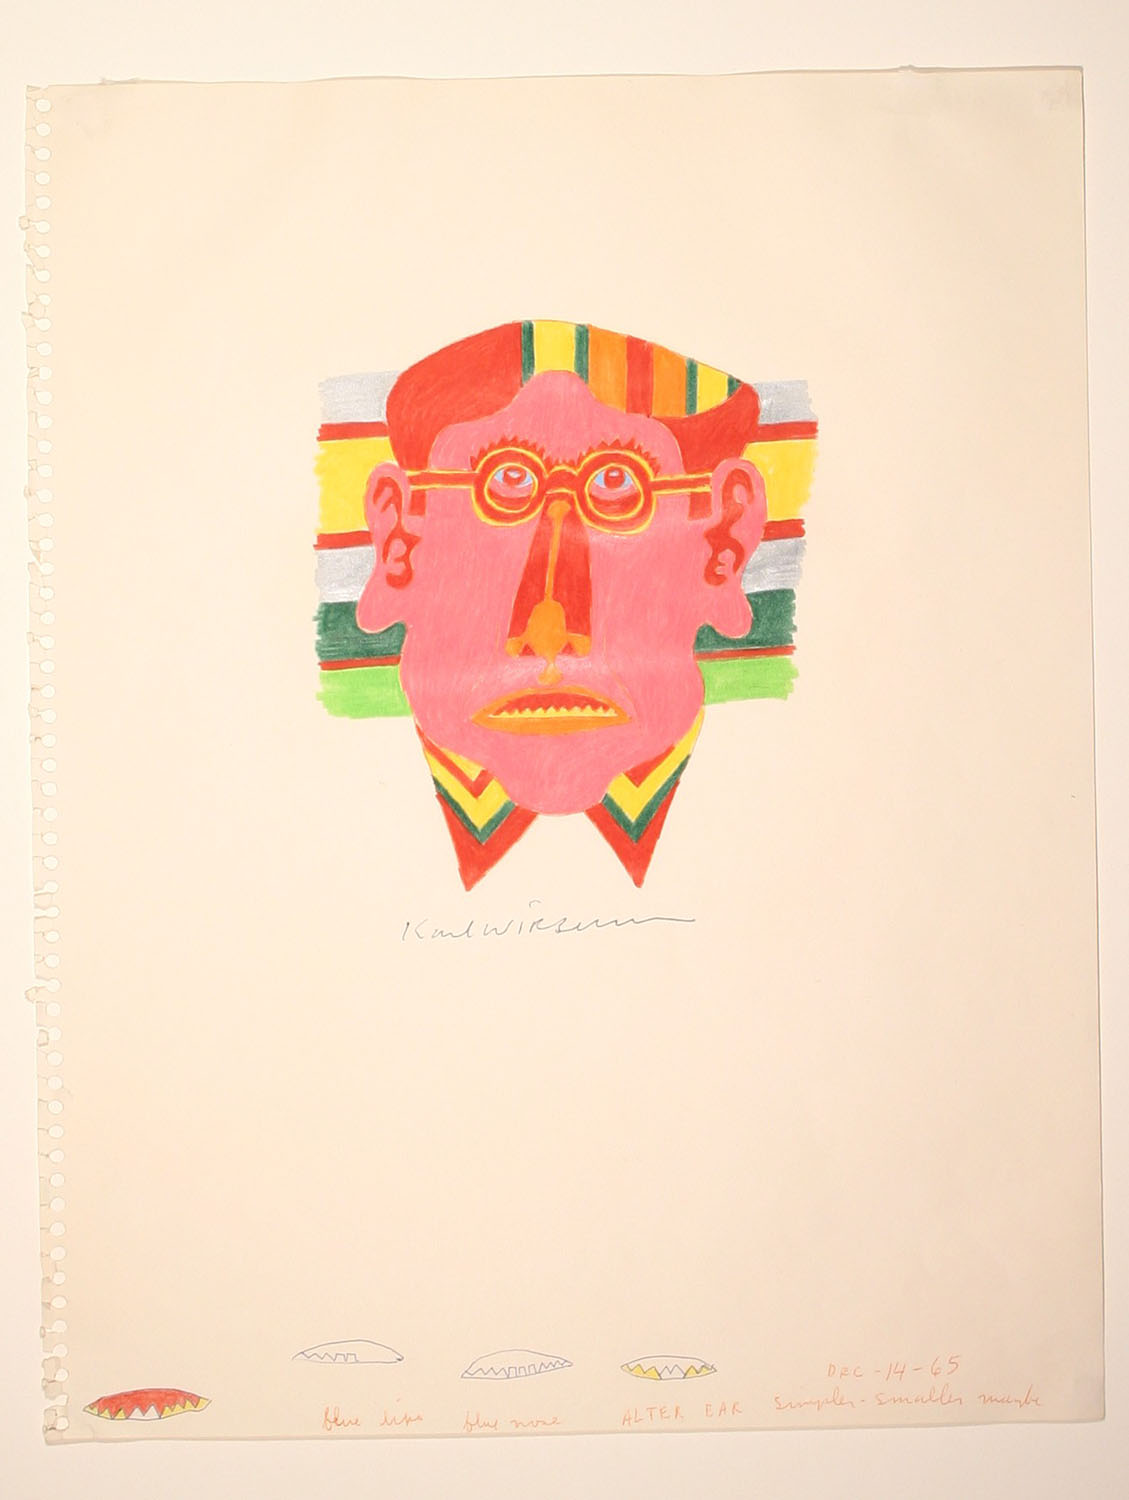 Karl Wirsum, Alter Ear, 1965. Wax, pigment and ink on paper. Collection of DePaul Art Museum, 2003.11